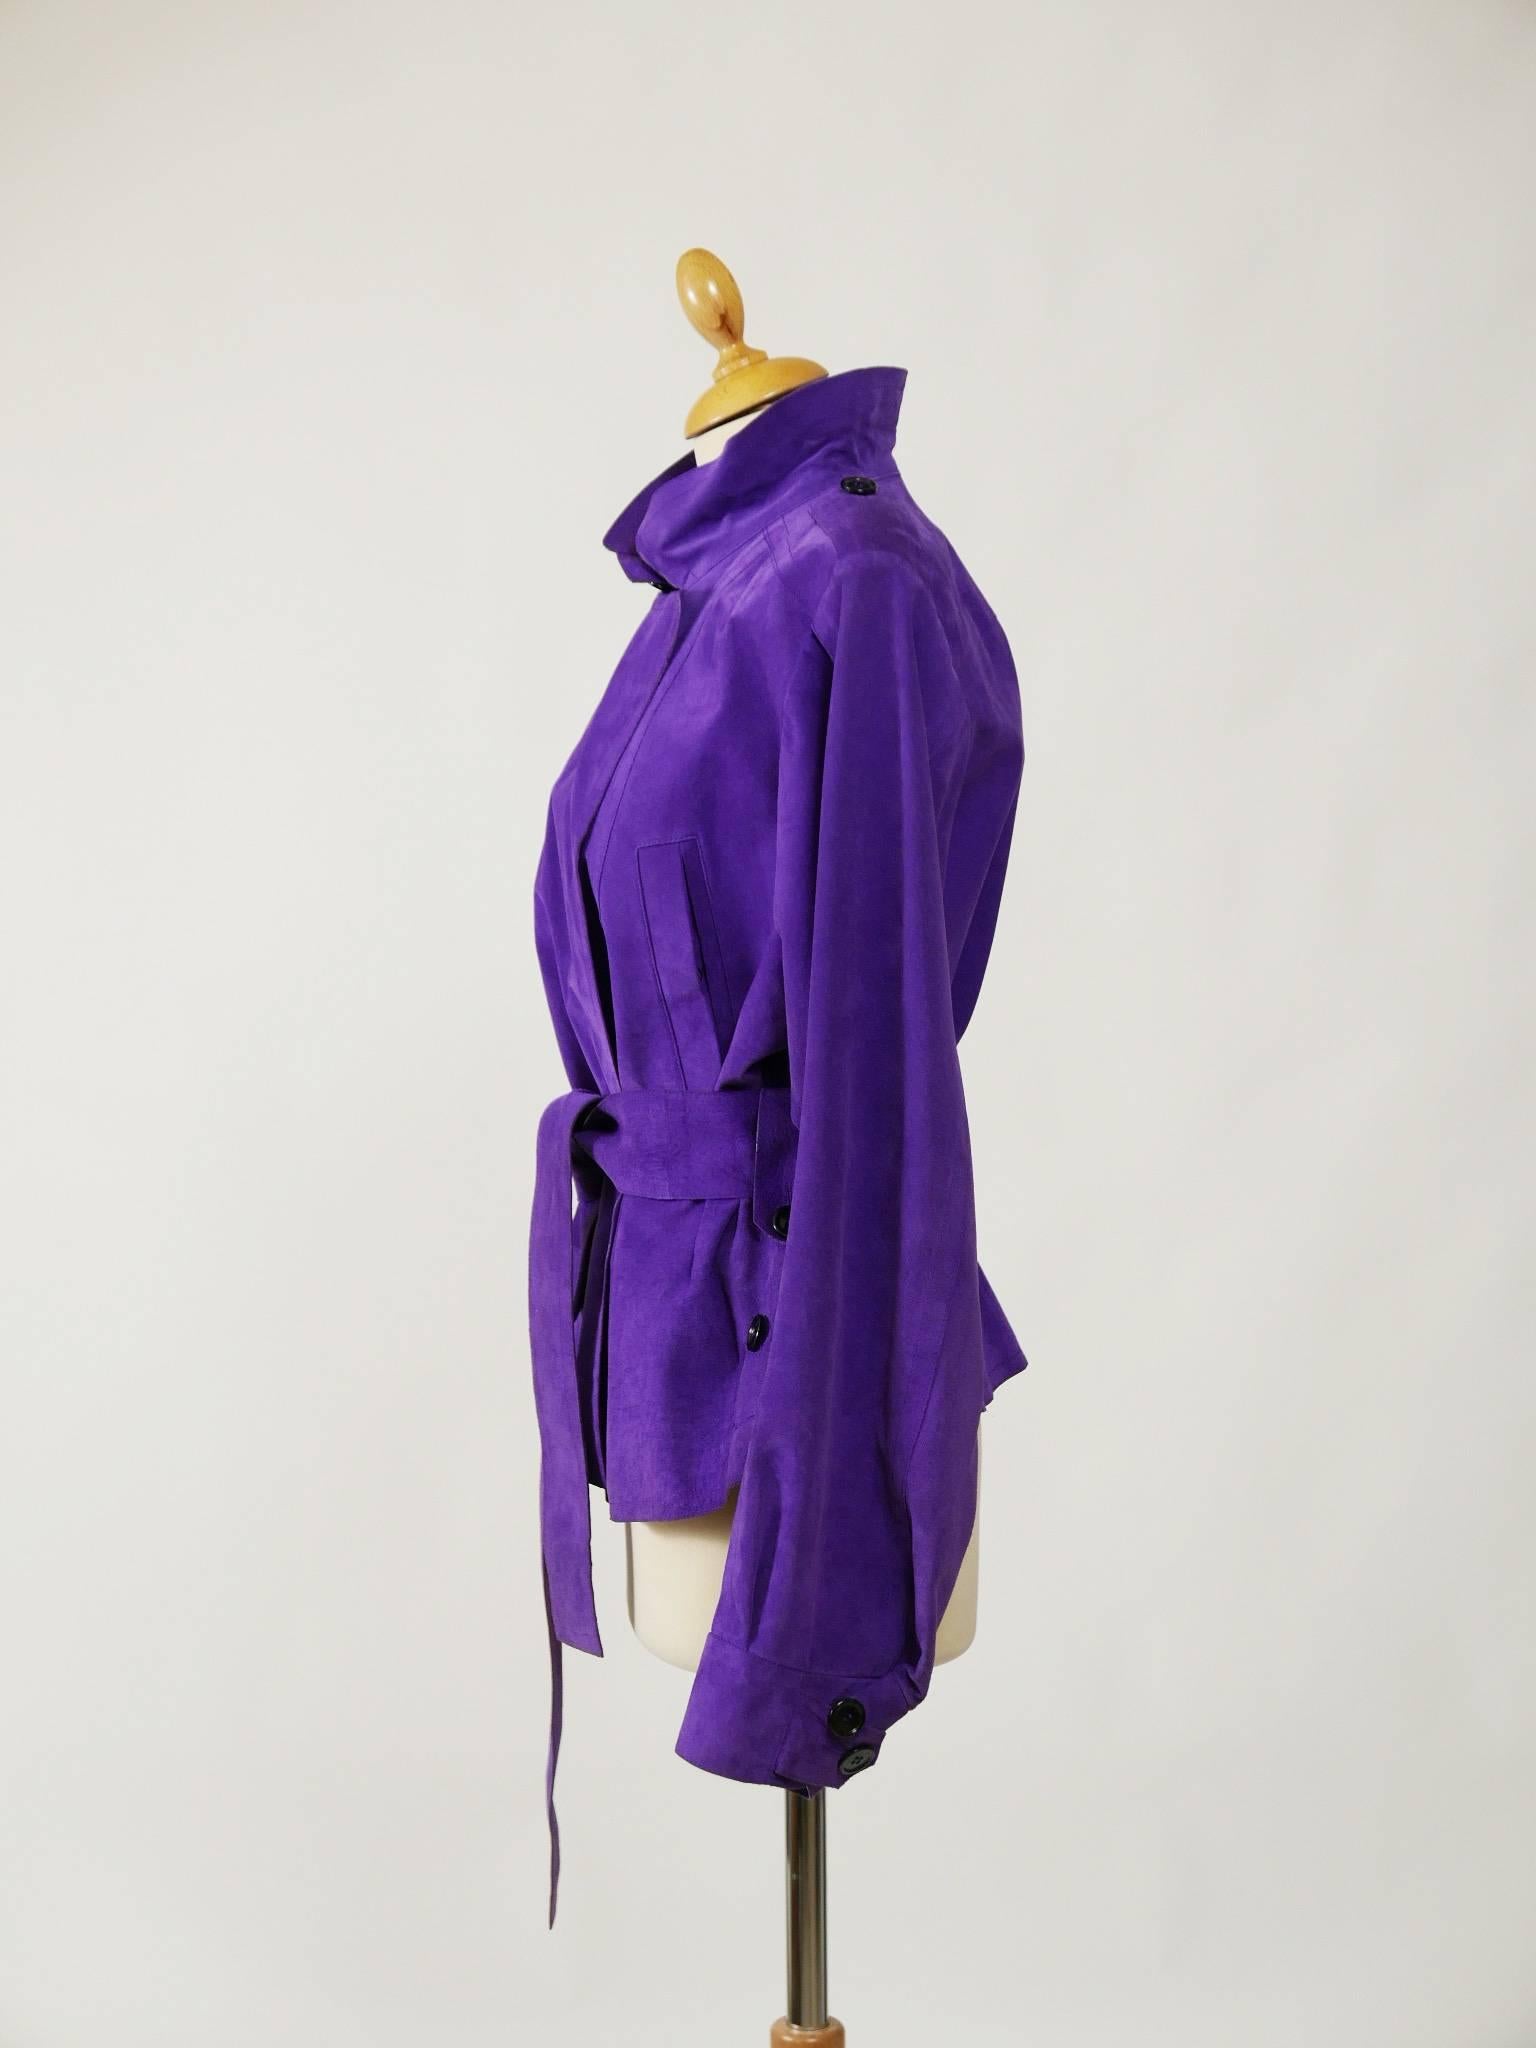 This lovely Yves Saint Laurent jacket is in a purple suede soft leather. It has assymetyric buttons closure, belt and side pockets.

Good condition

Label: Yves Saint Laurent Rive Gauche 
Fabric: suede leather
Color: